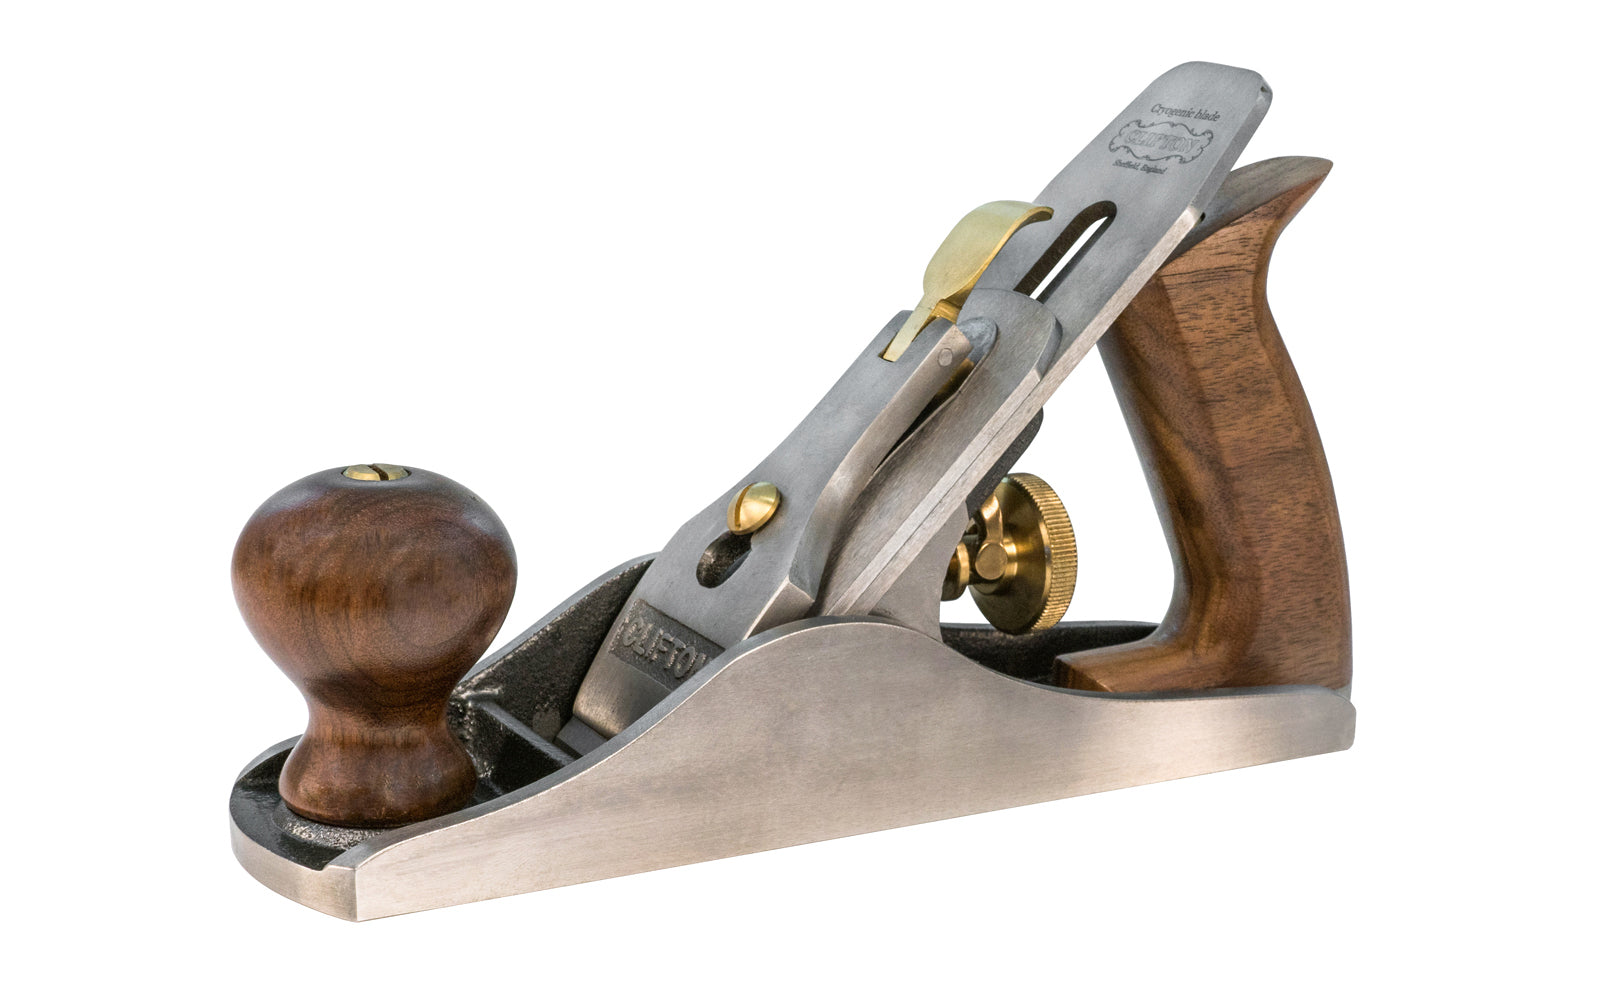 Clifton No. 3 Bench Plane. Cutting Iron is made from cryogenically treated 01 steel, hardened and tempered to 60-62 Rockwell C the precision ground and are 0.120